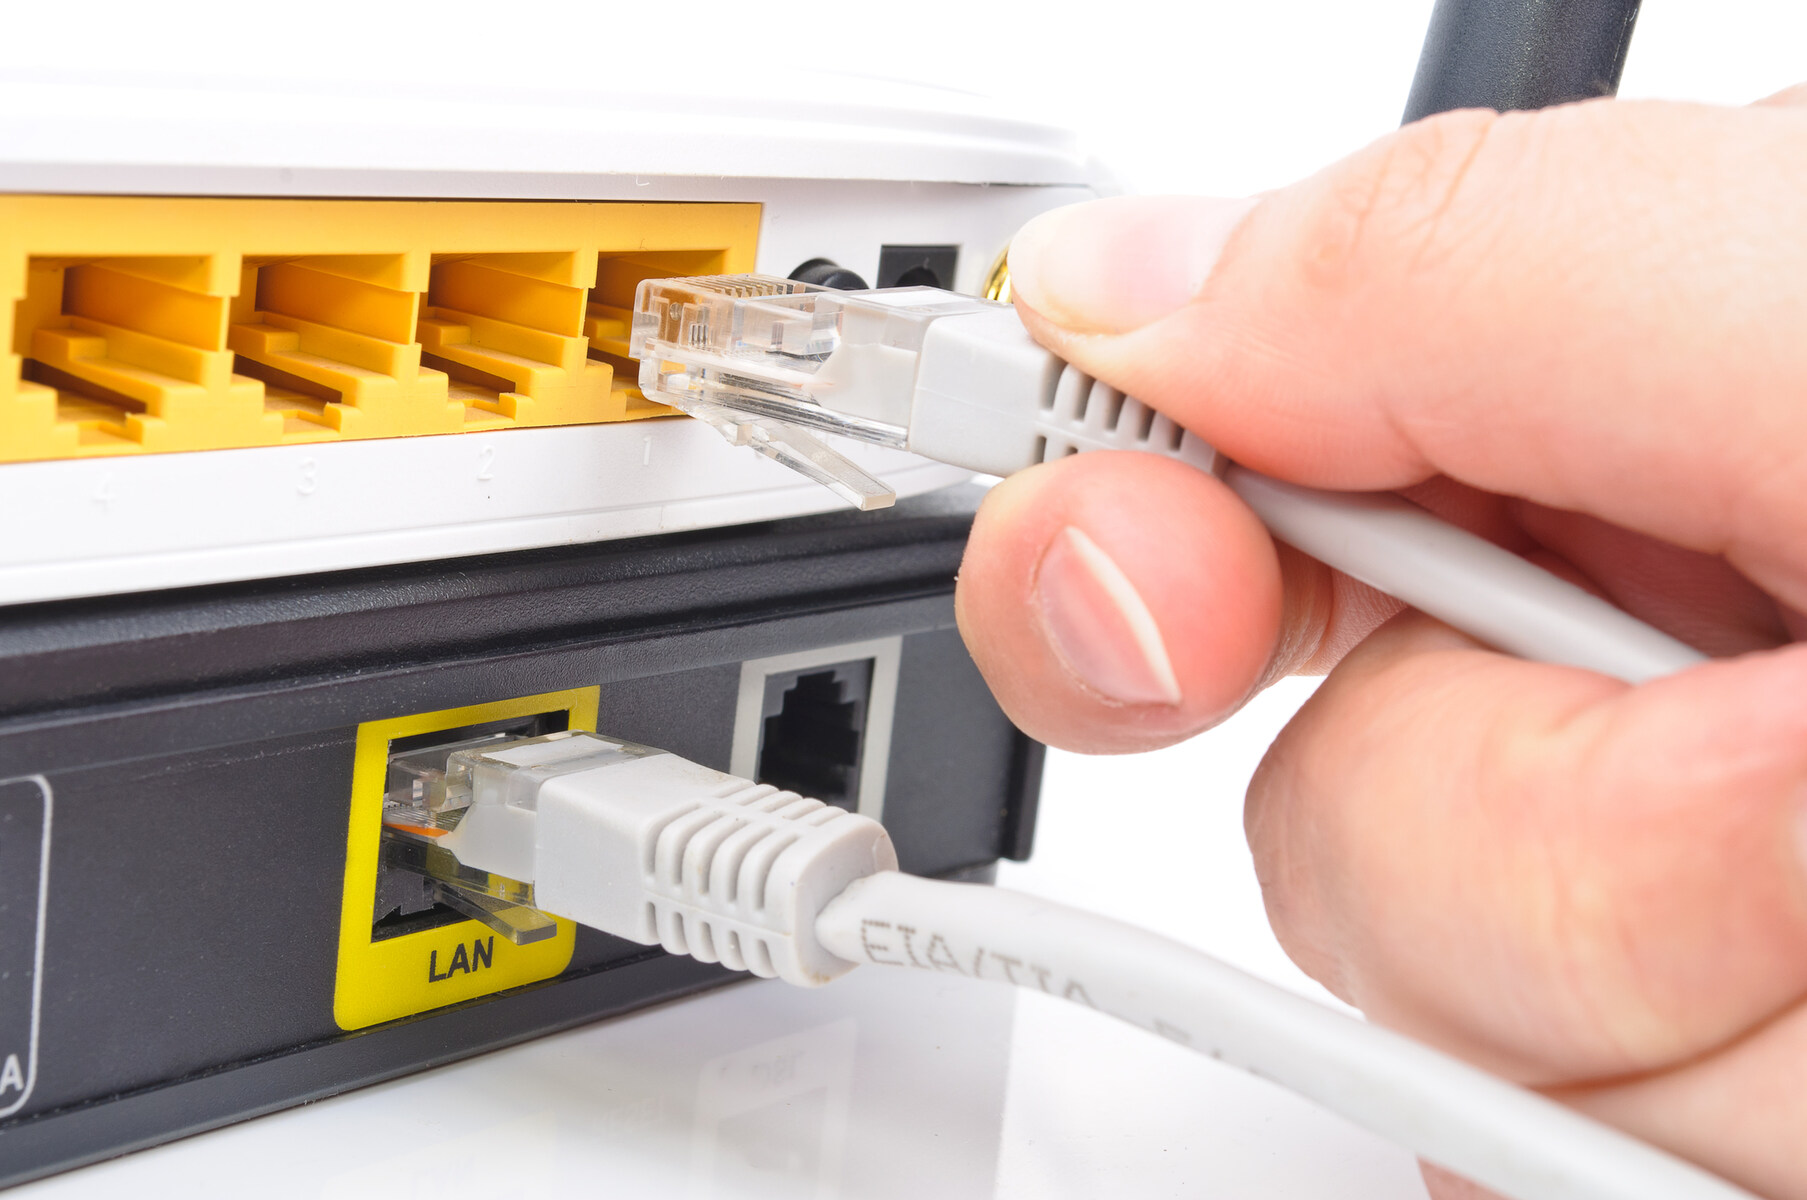 How To Set Up A Network Switch